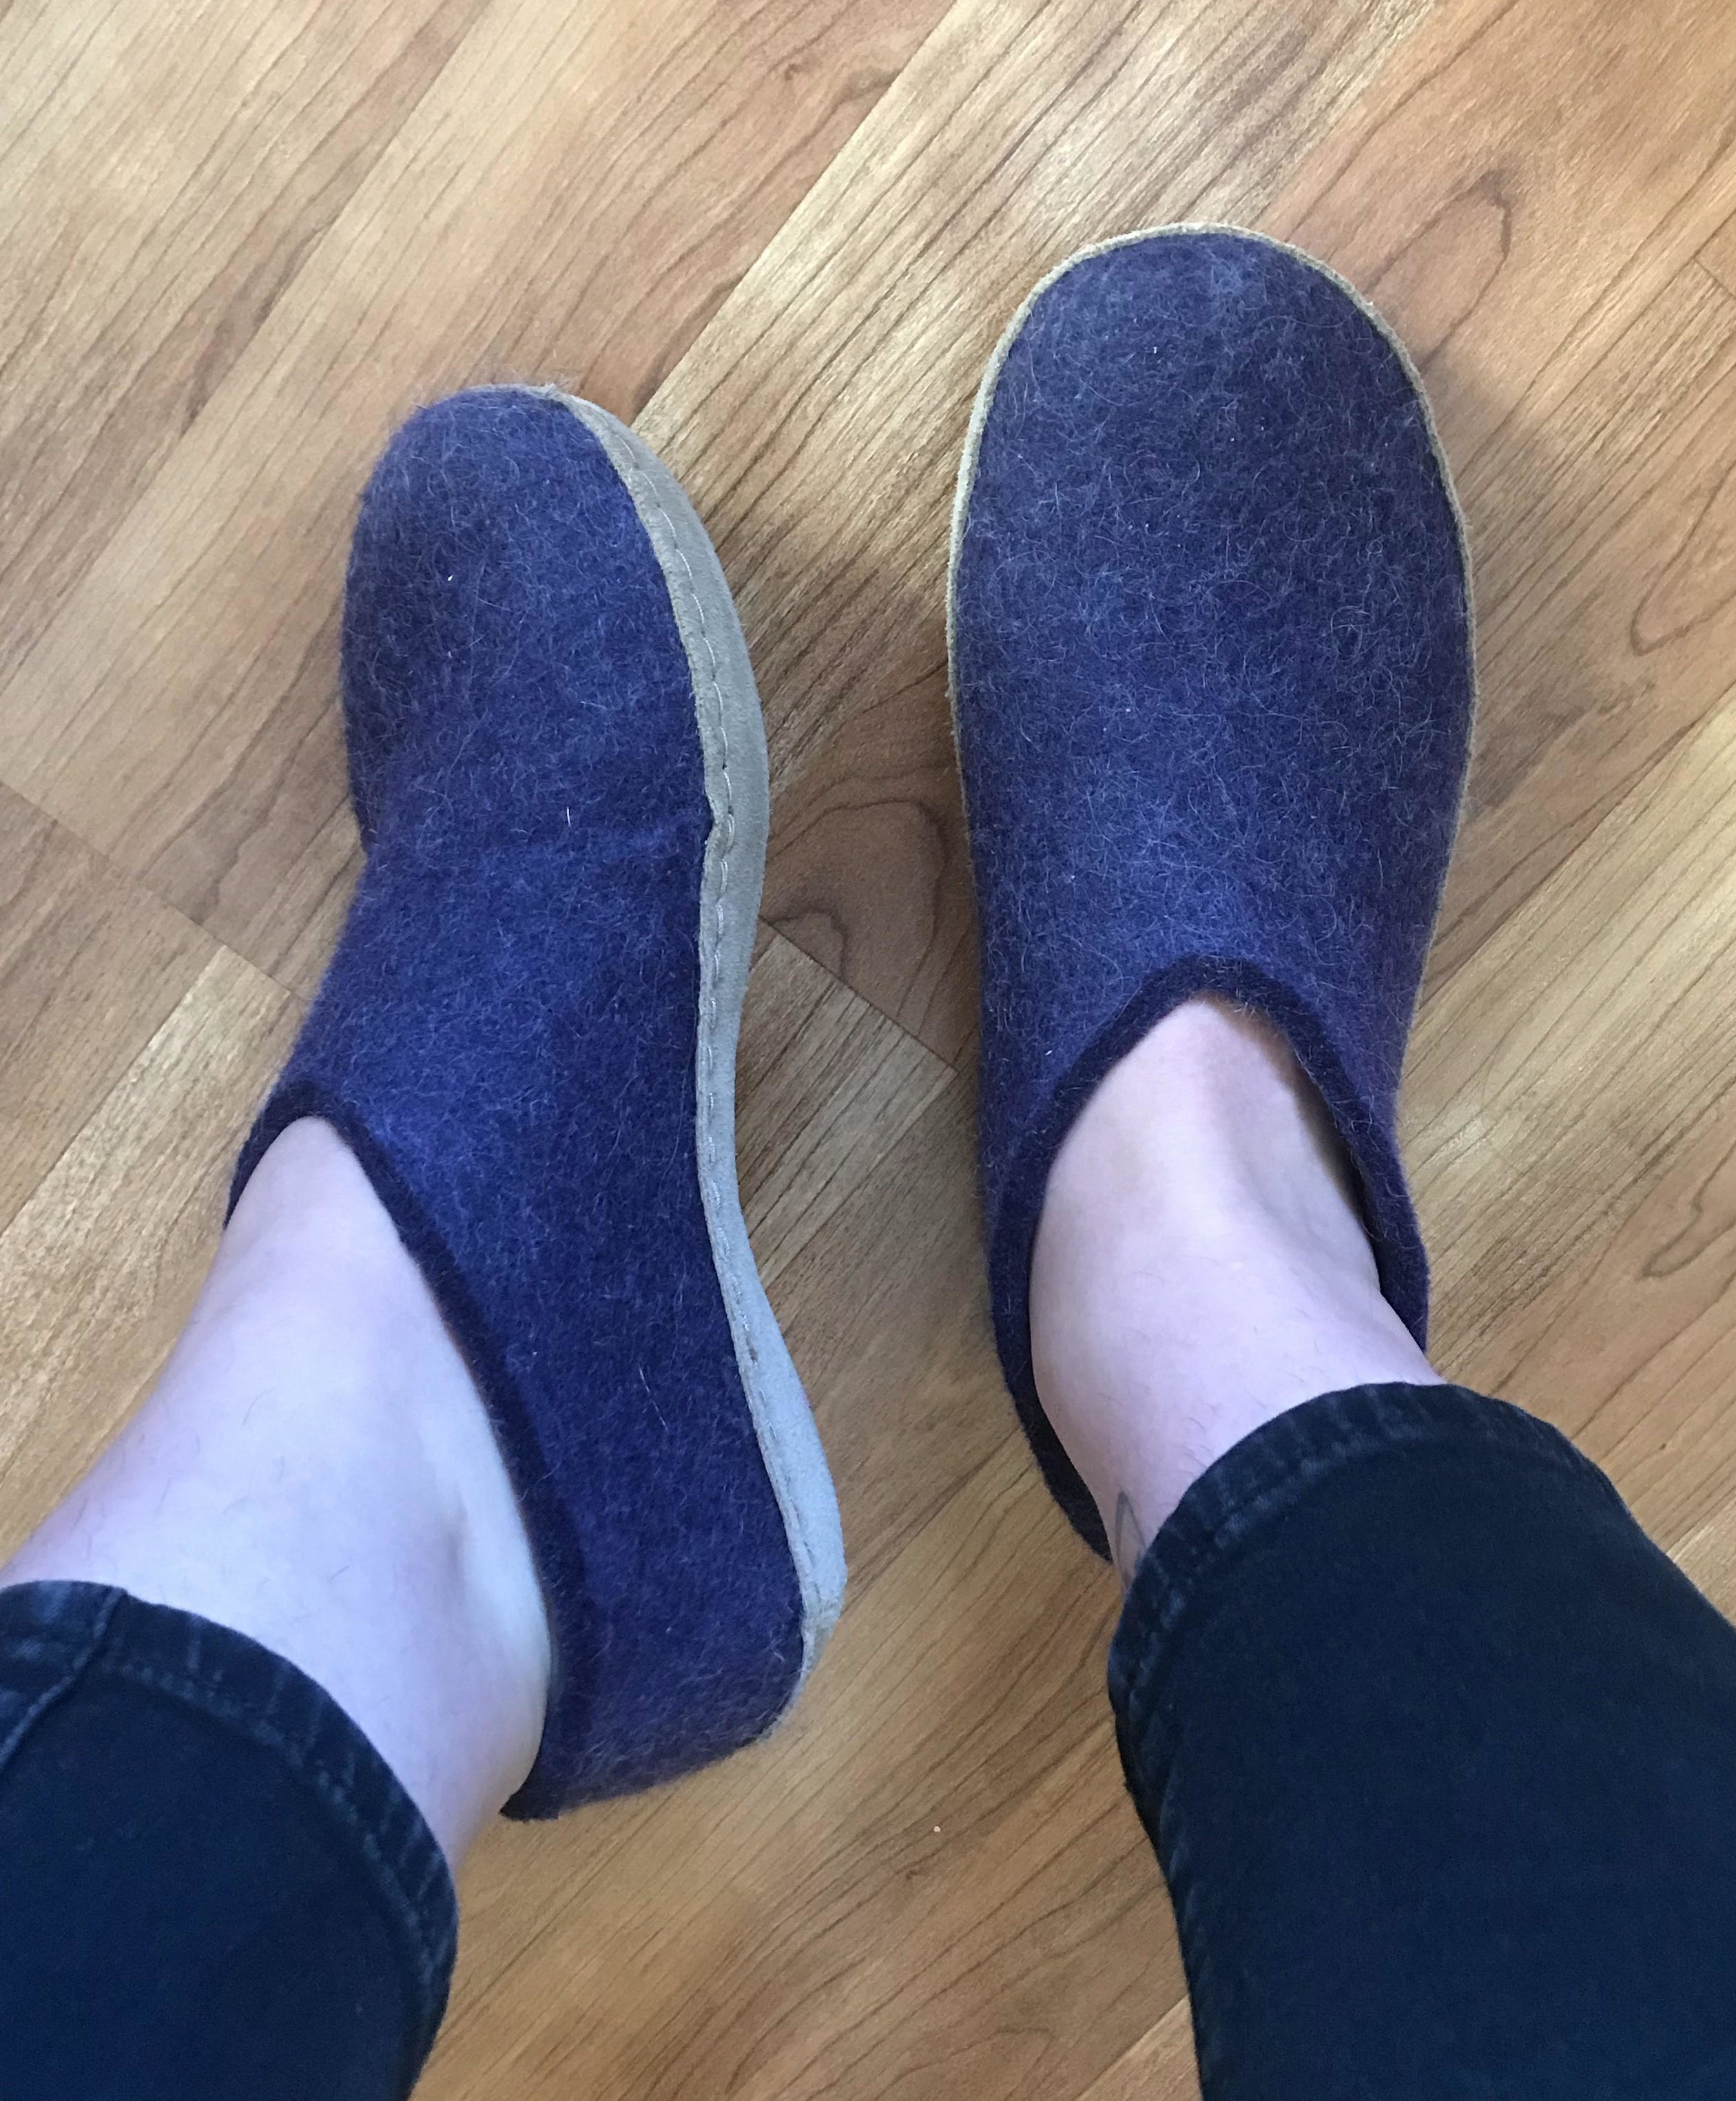 writer in dark purple shoe-like slippers with tan leather soles